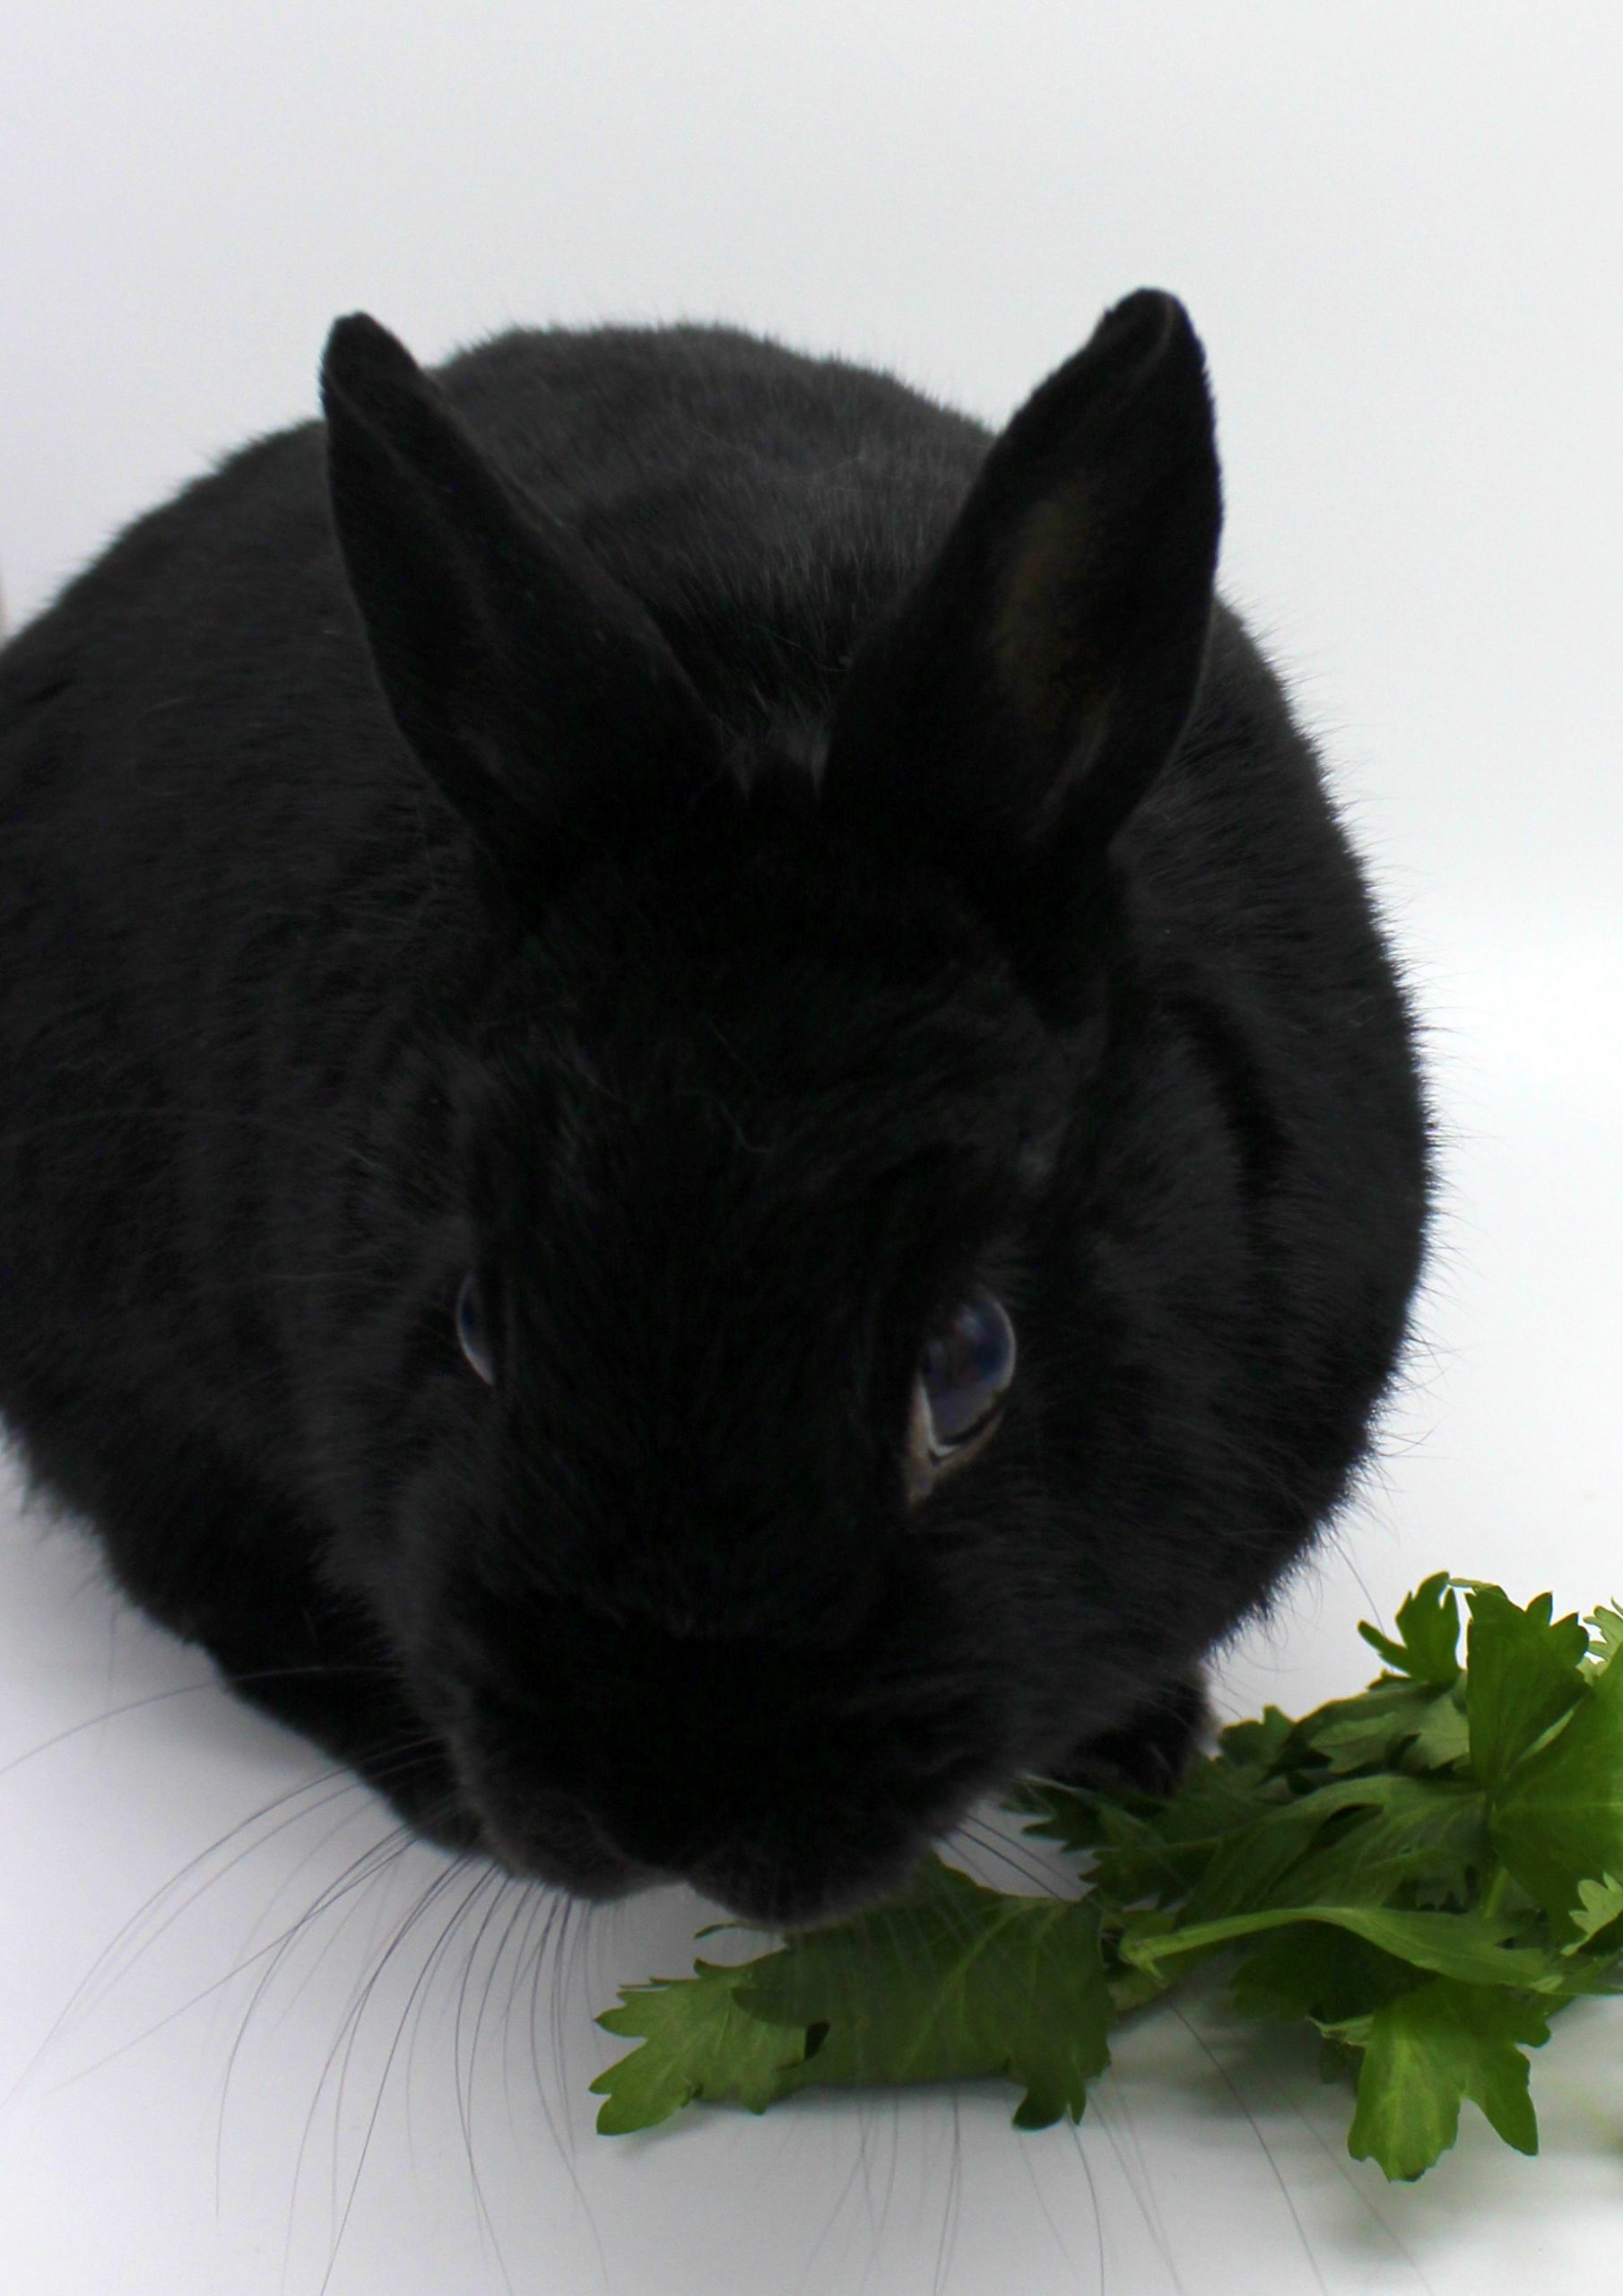 Cute black bunny and a piece of celery